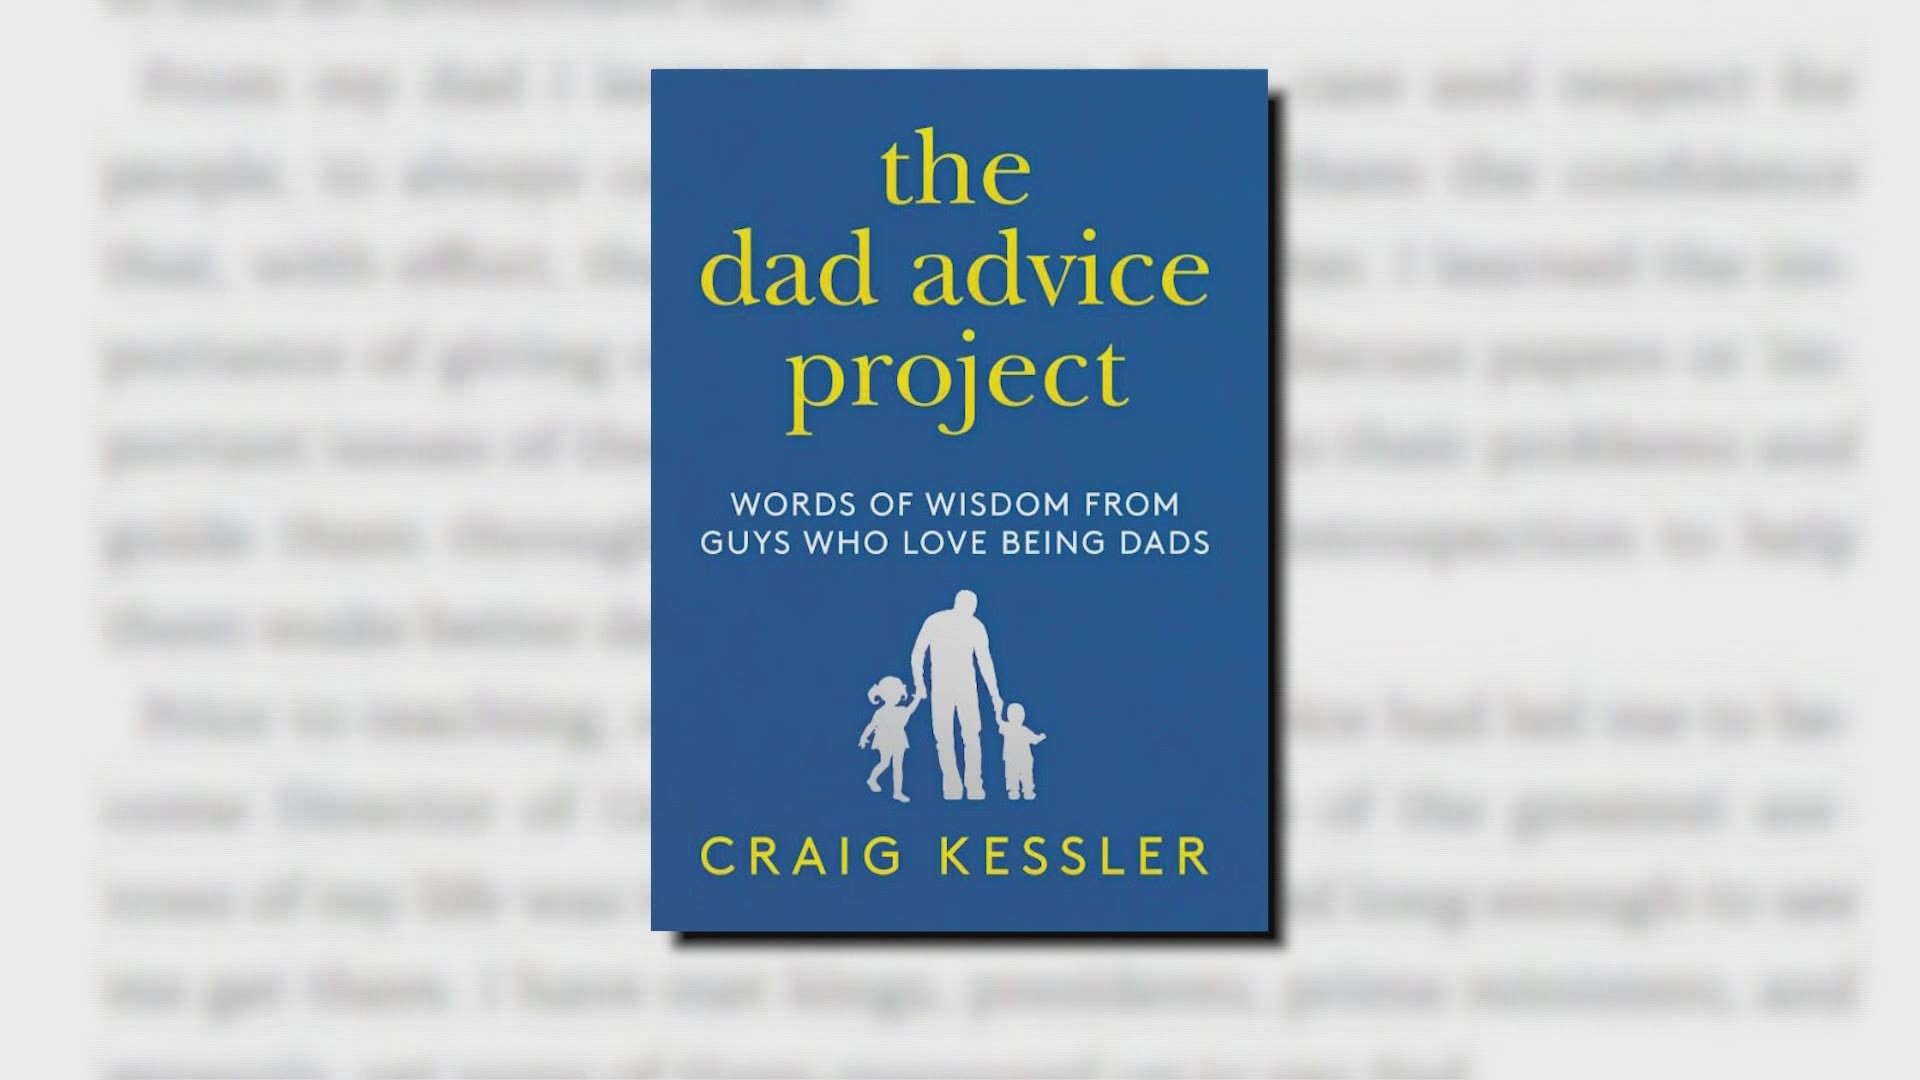 "I decided to ask a couple of buddies to write me a letter on how to be a good dad..." said Craig Kessler.